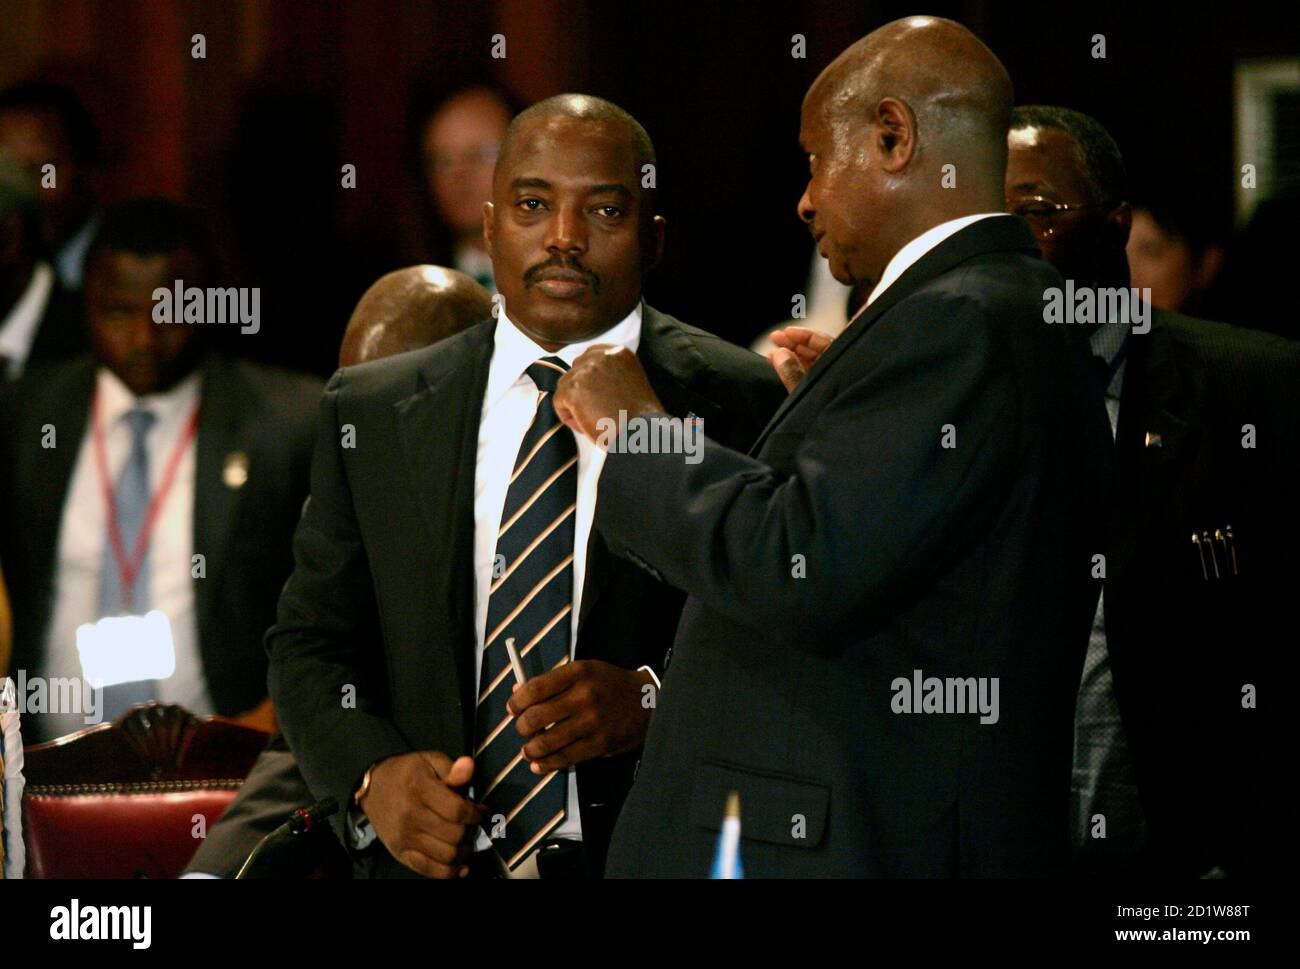 Democratic Republic of Congo's President Joseph Kabila listens to his Ugandan counterpart Yoweri Museveni after the opening session of the summit on the ongoing war crisis in eastern Congo in Kenya's capital Nairobi, November 7, 2008.  Congolese Tutsi rebels and government troops fought near a refugee camp in east Congo on Friday, forcing thousands of civilians to flee in panic. REUTERS/Thomas Mukoya (KENYA) Stock Photo